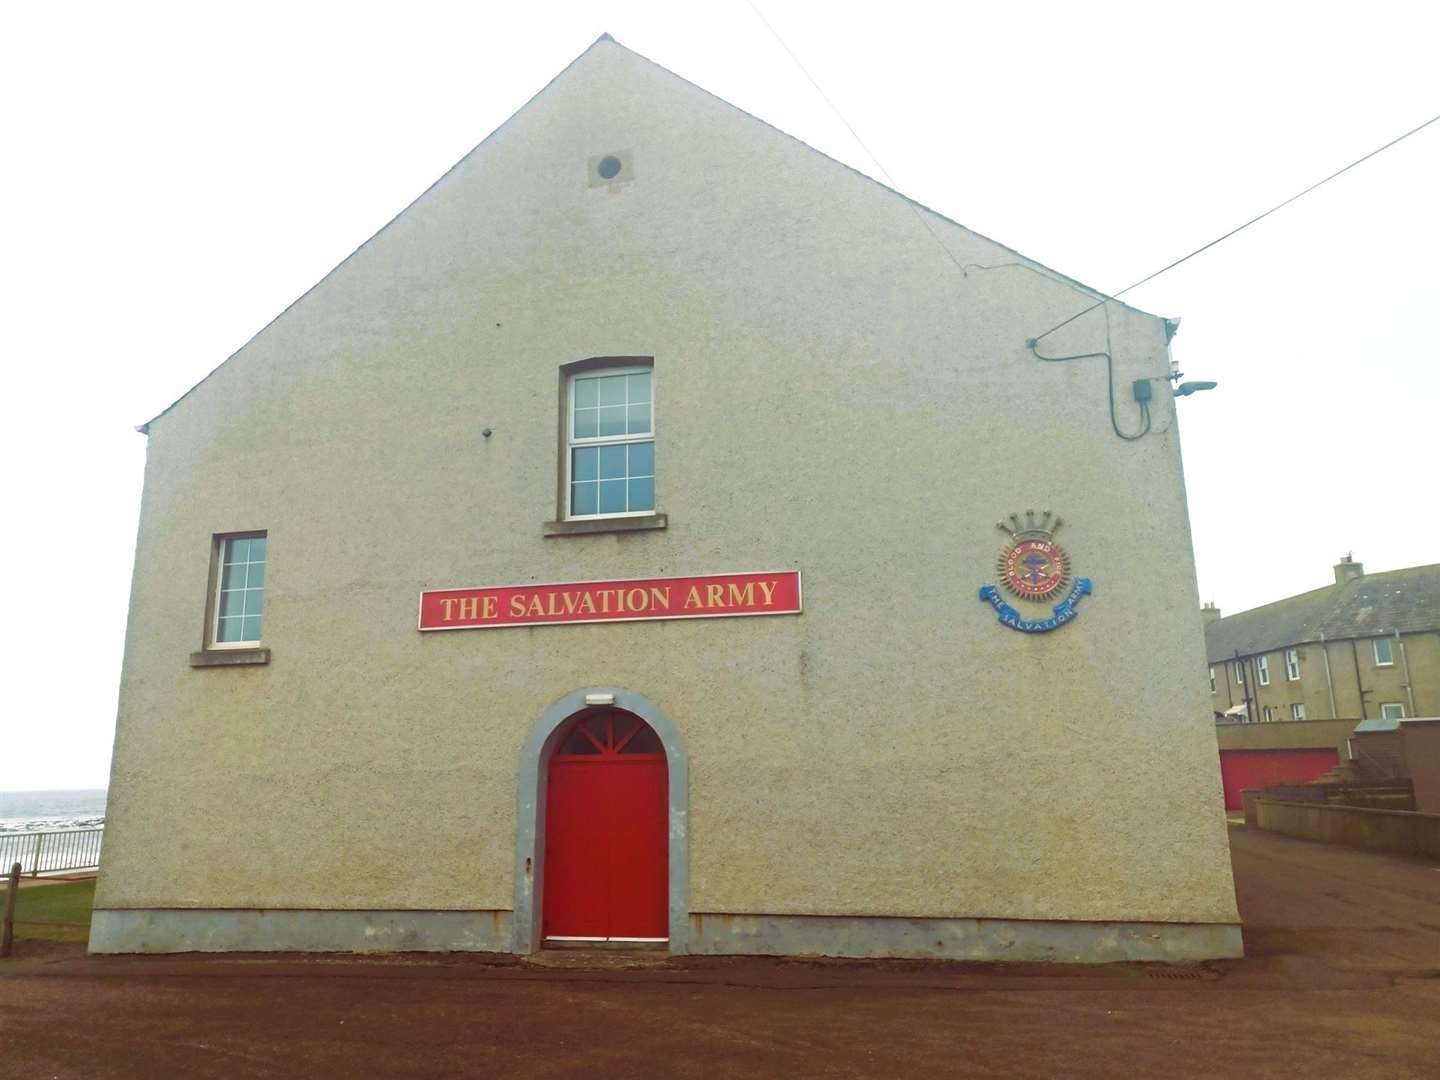 The Salvation Army building in Thurso. Picture: A Glasgow